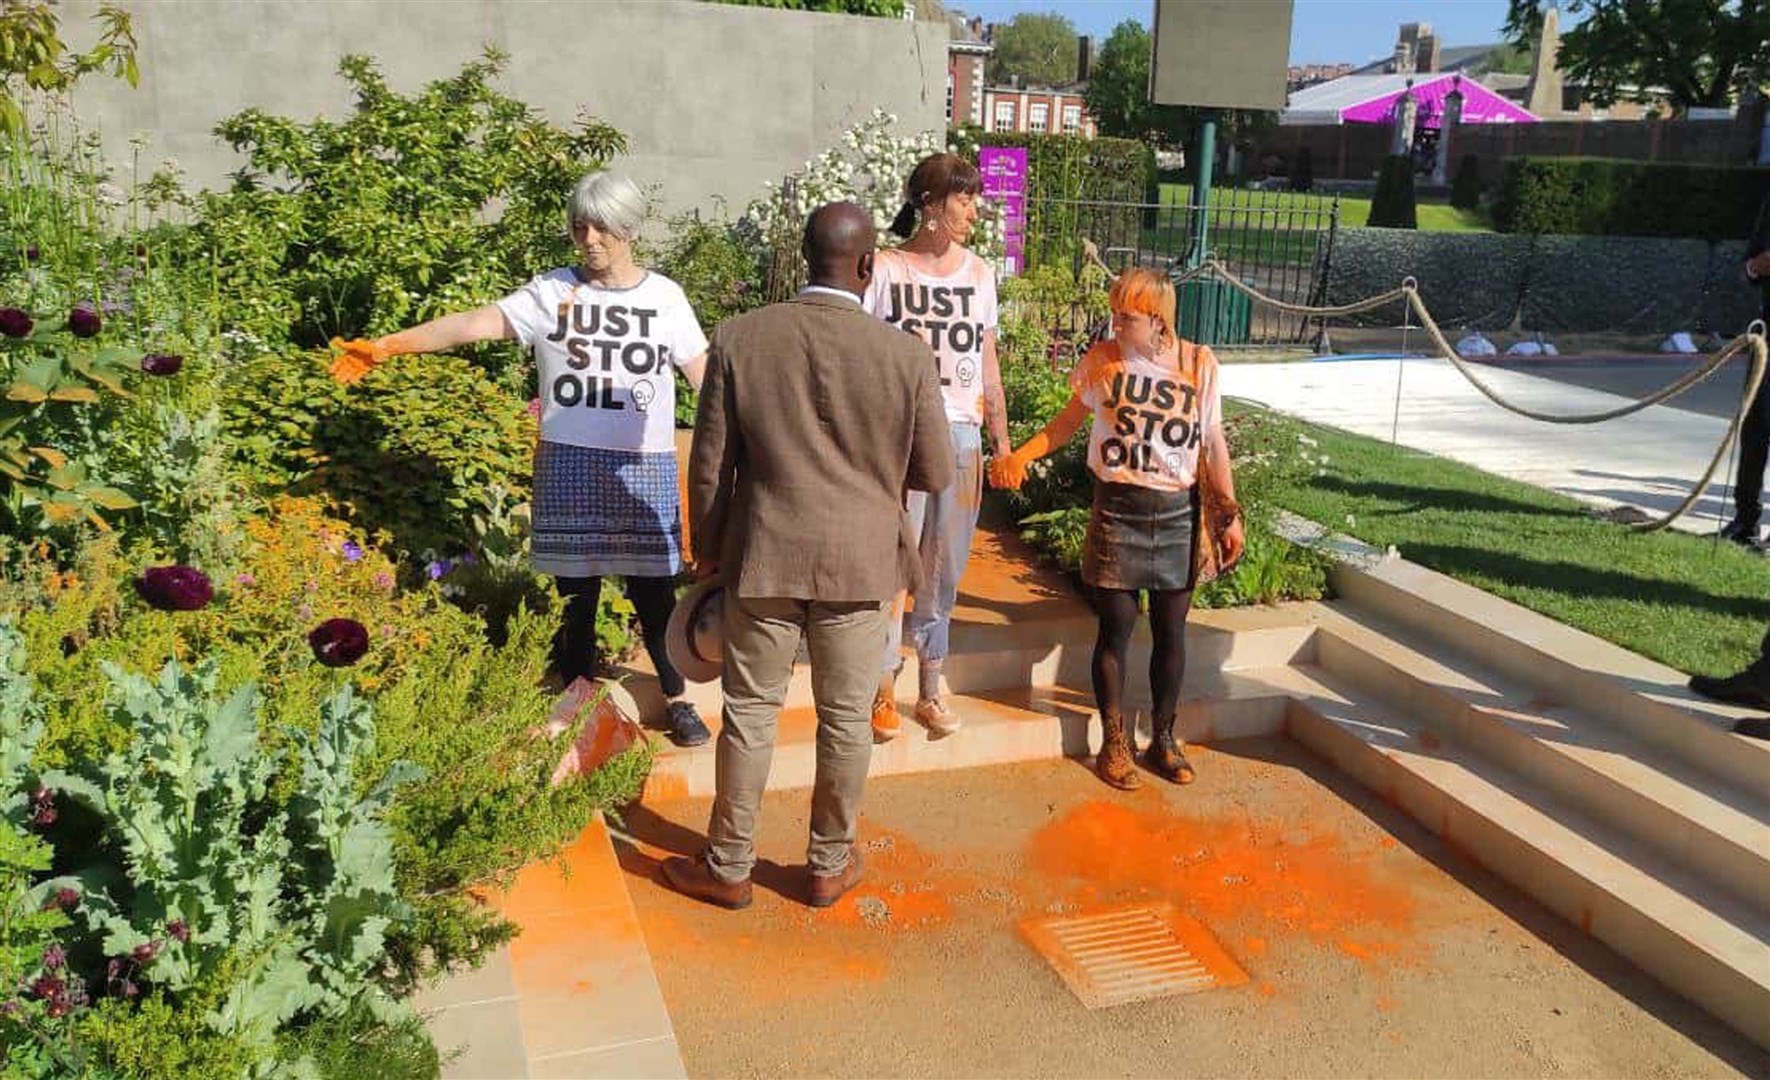 Three protesters at Chelsea Flower Show who have been arrested on suspicion of criminal damage in connection with a Just Stop Oil protest (Just Stop Oil/PA)